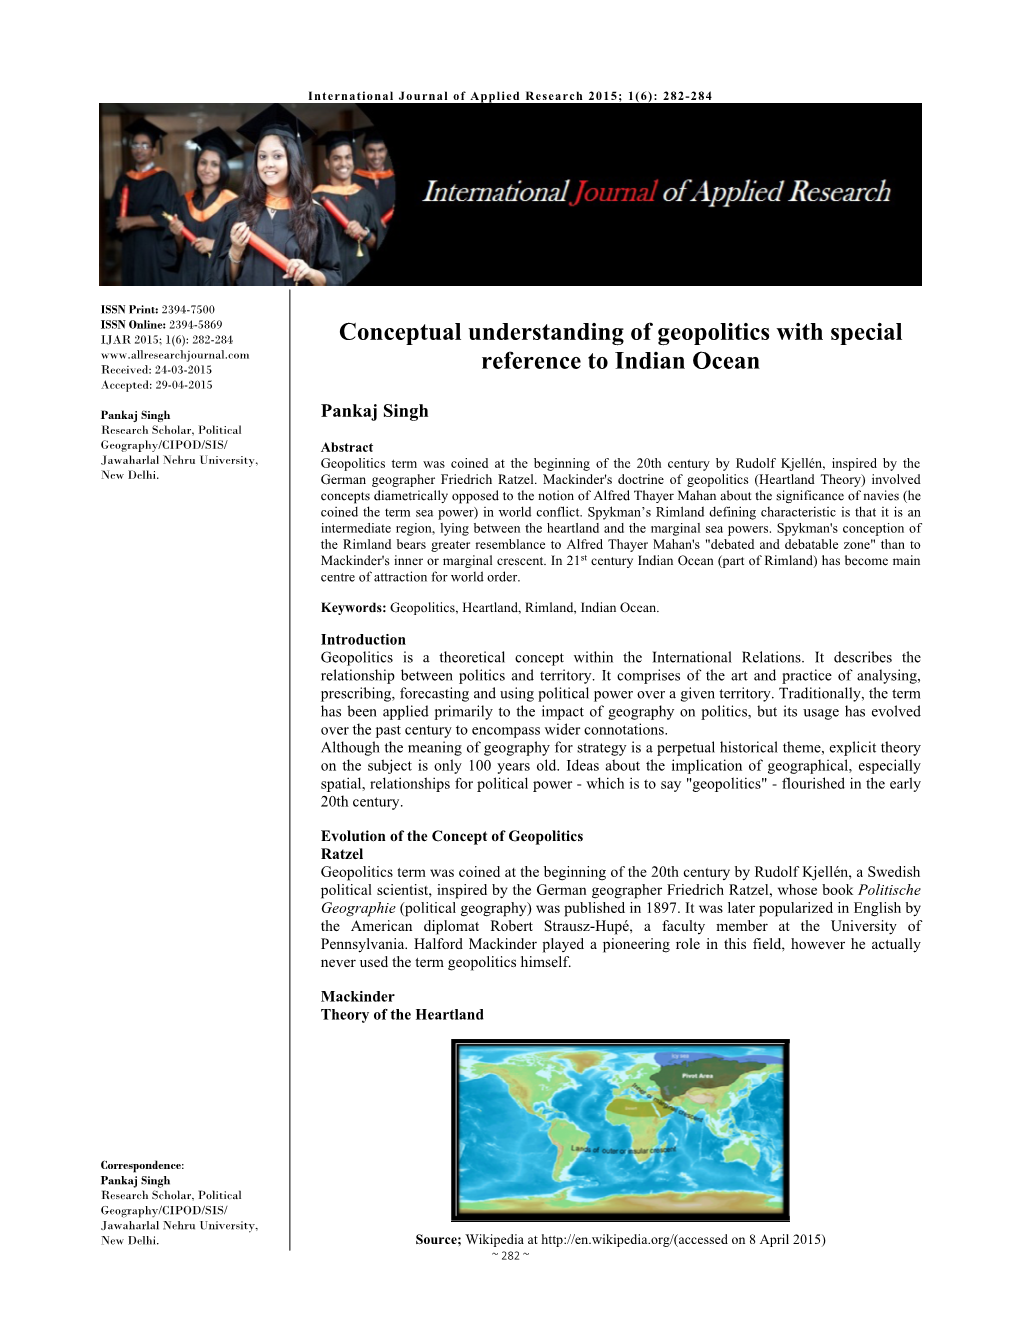 Conceptual Understanding of Geopolitics with Special Reference to Indian Ocean